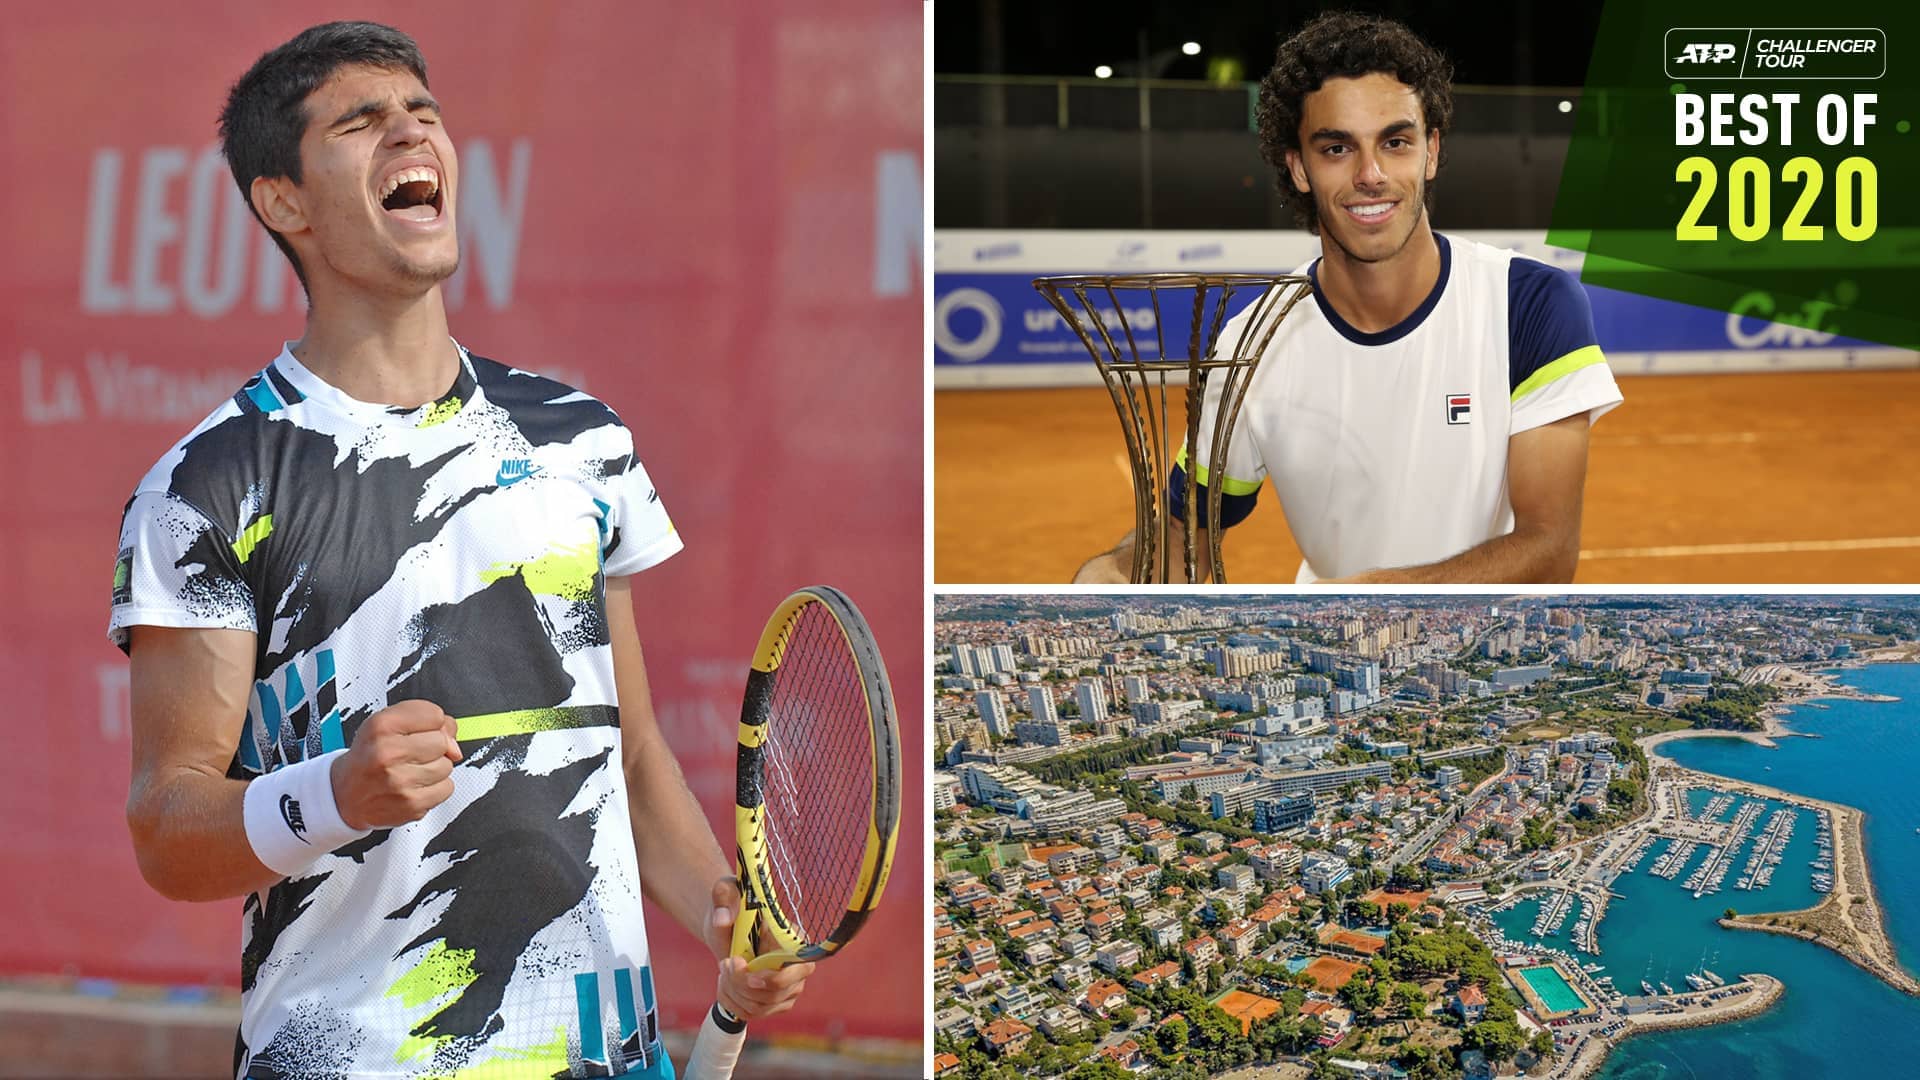 Carlos Alcaraz (left) and Francisco Cerundolo were the breakout stars of the ATP Challenger Tour in 2020, while scenic Split, Croatia made a dazzling debut.